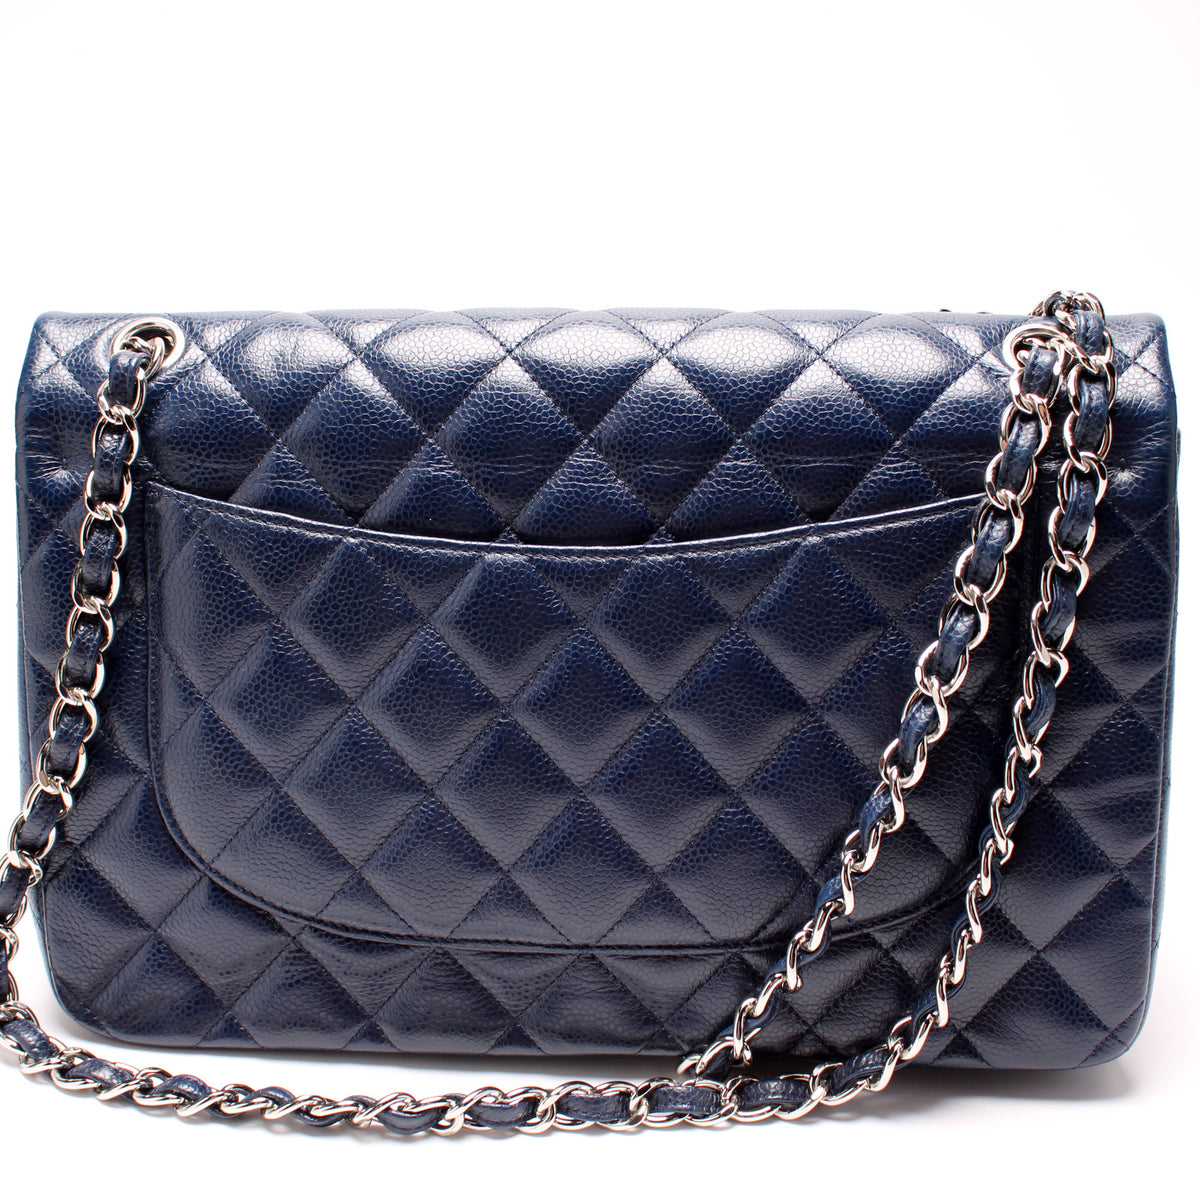 New 18S Chanel Pearly Navy Blue Caviar Medium Classic Double Flap